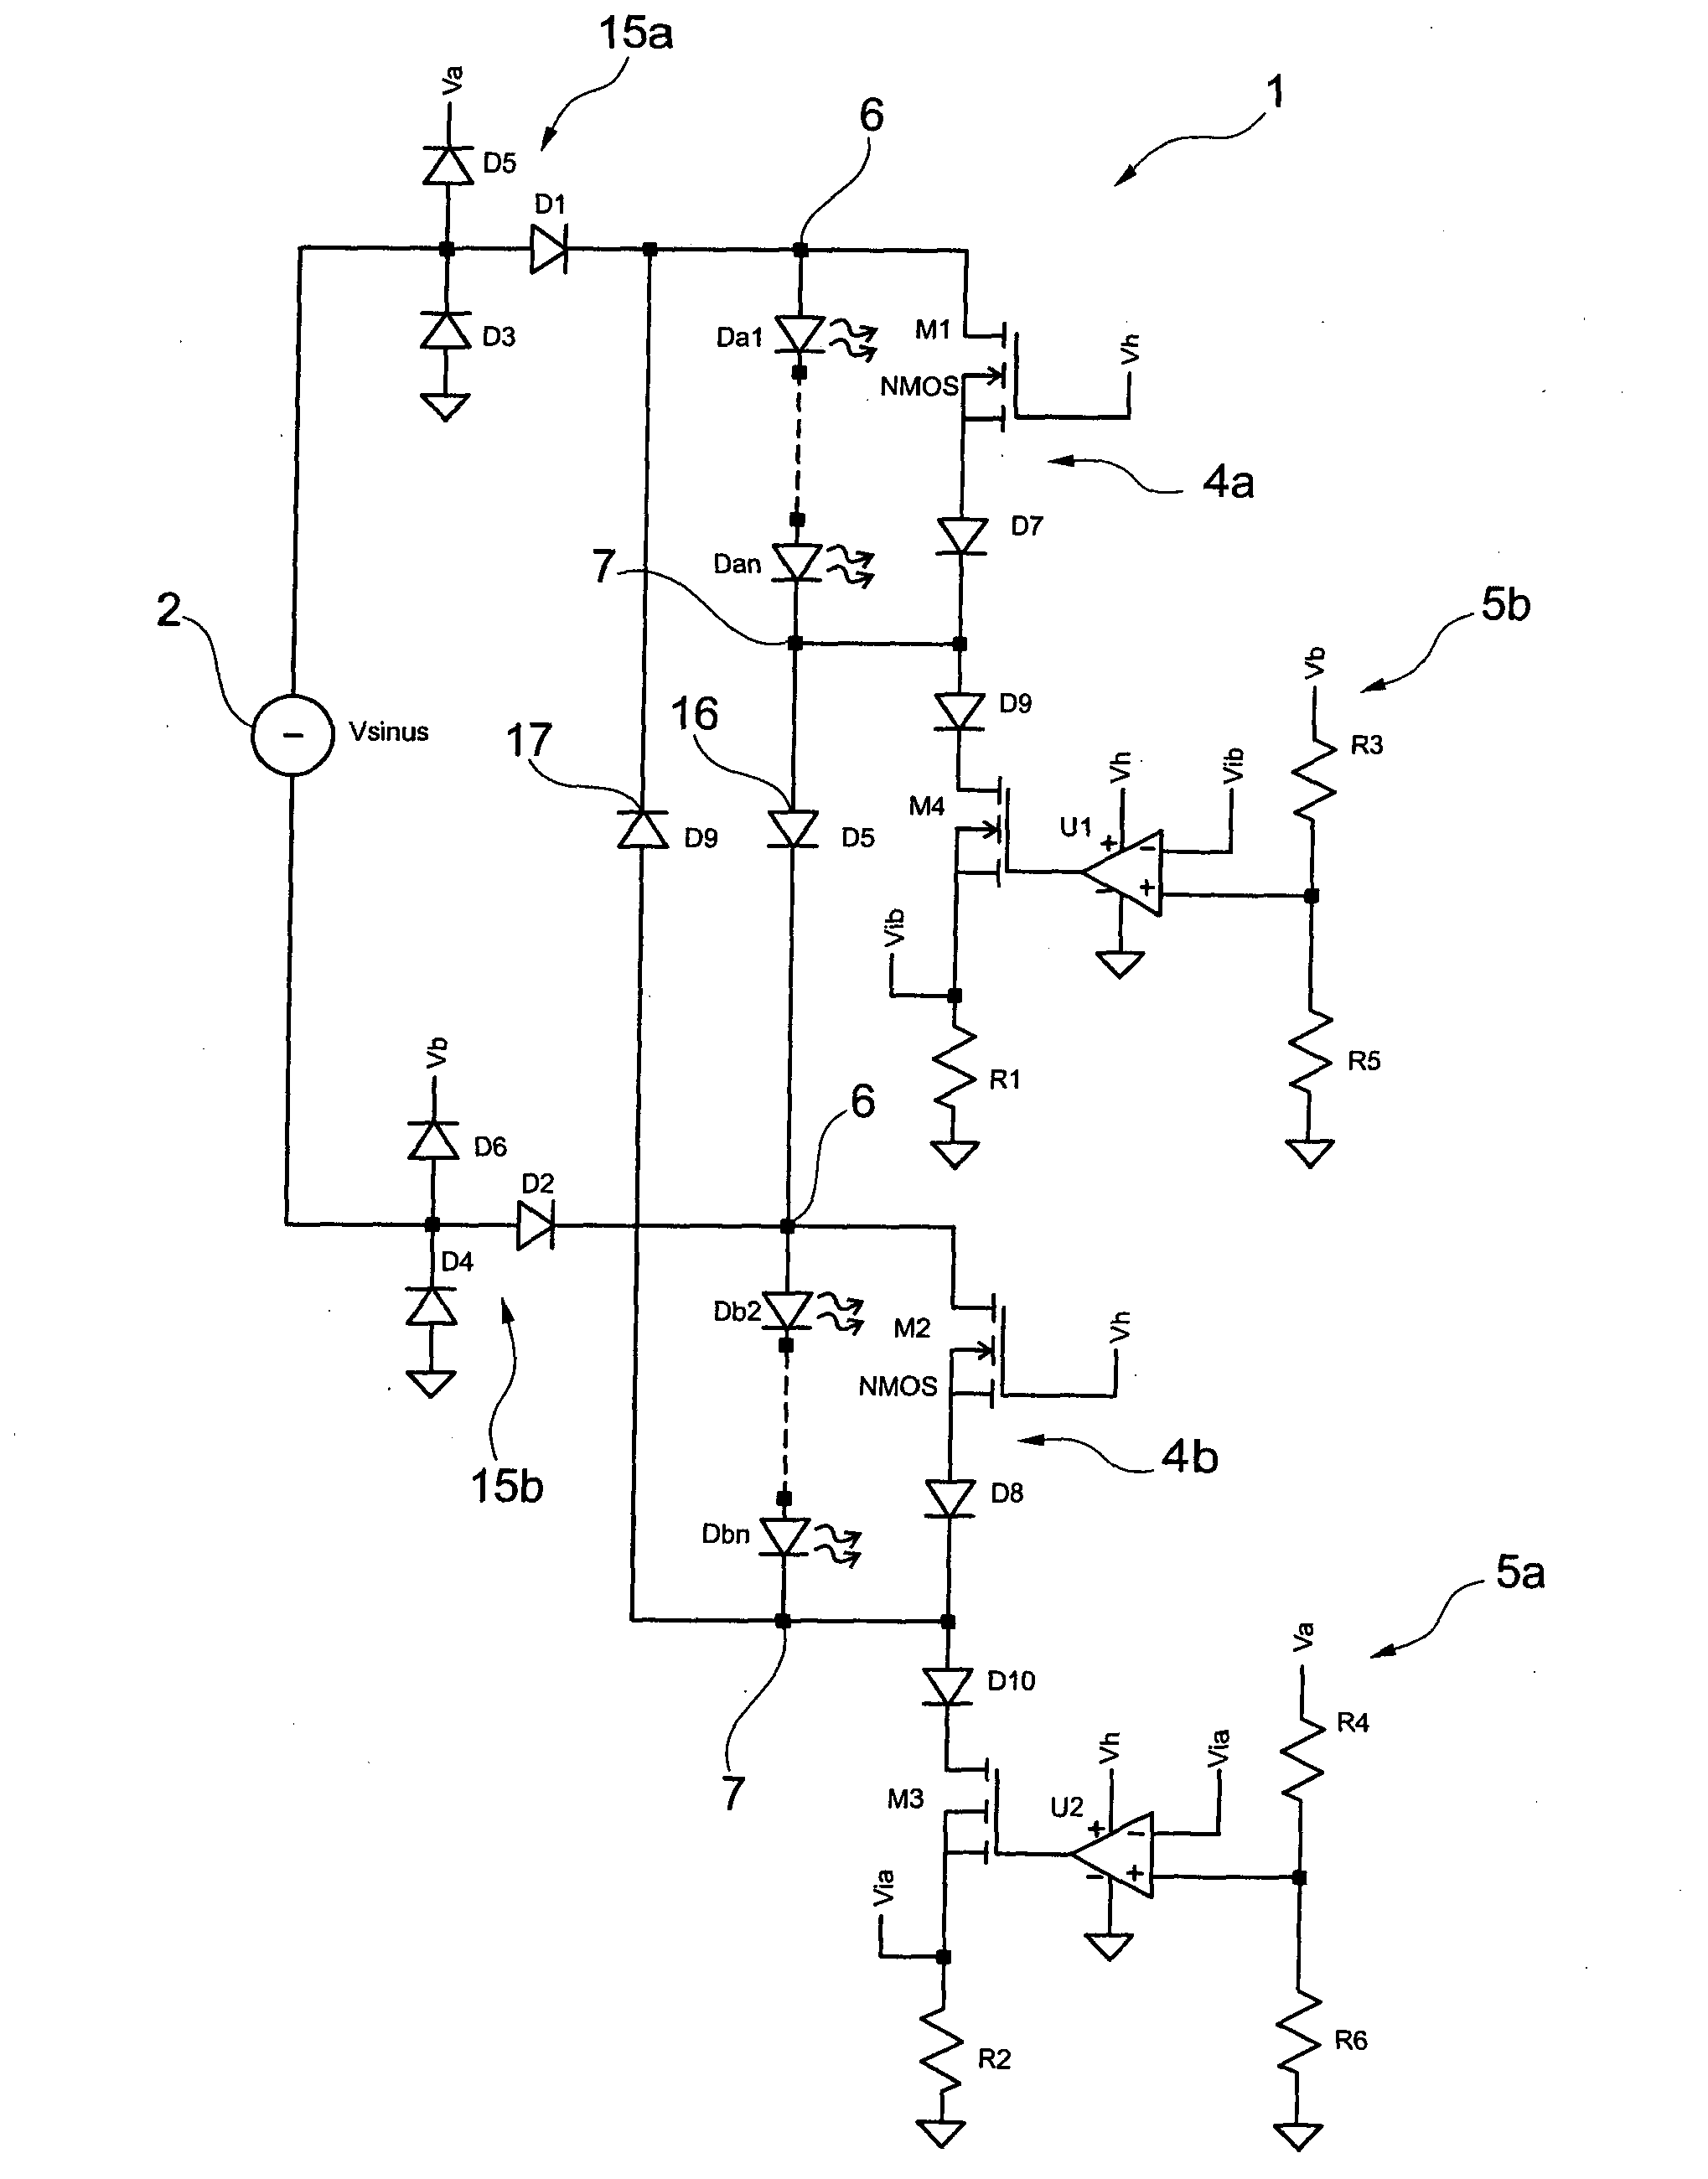 Lighting Device For An AC Power Supply